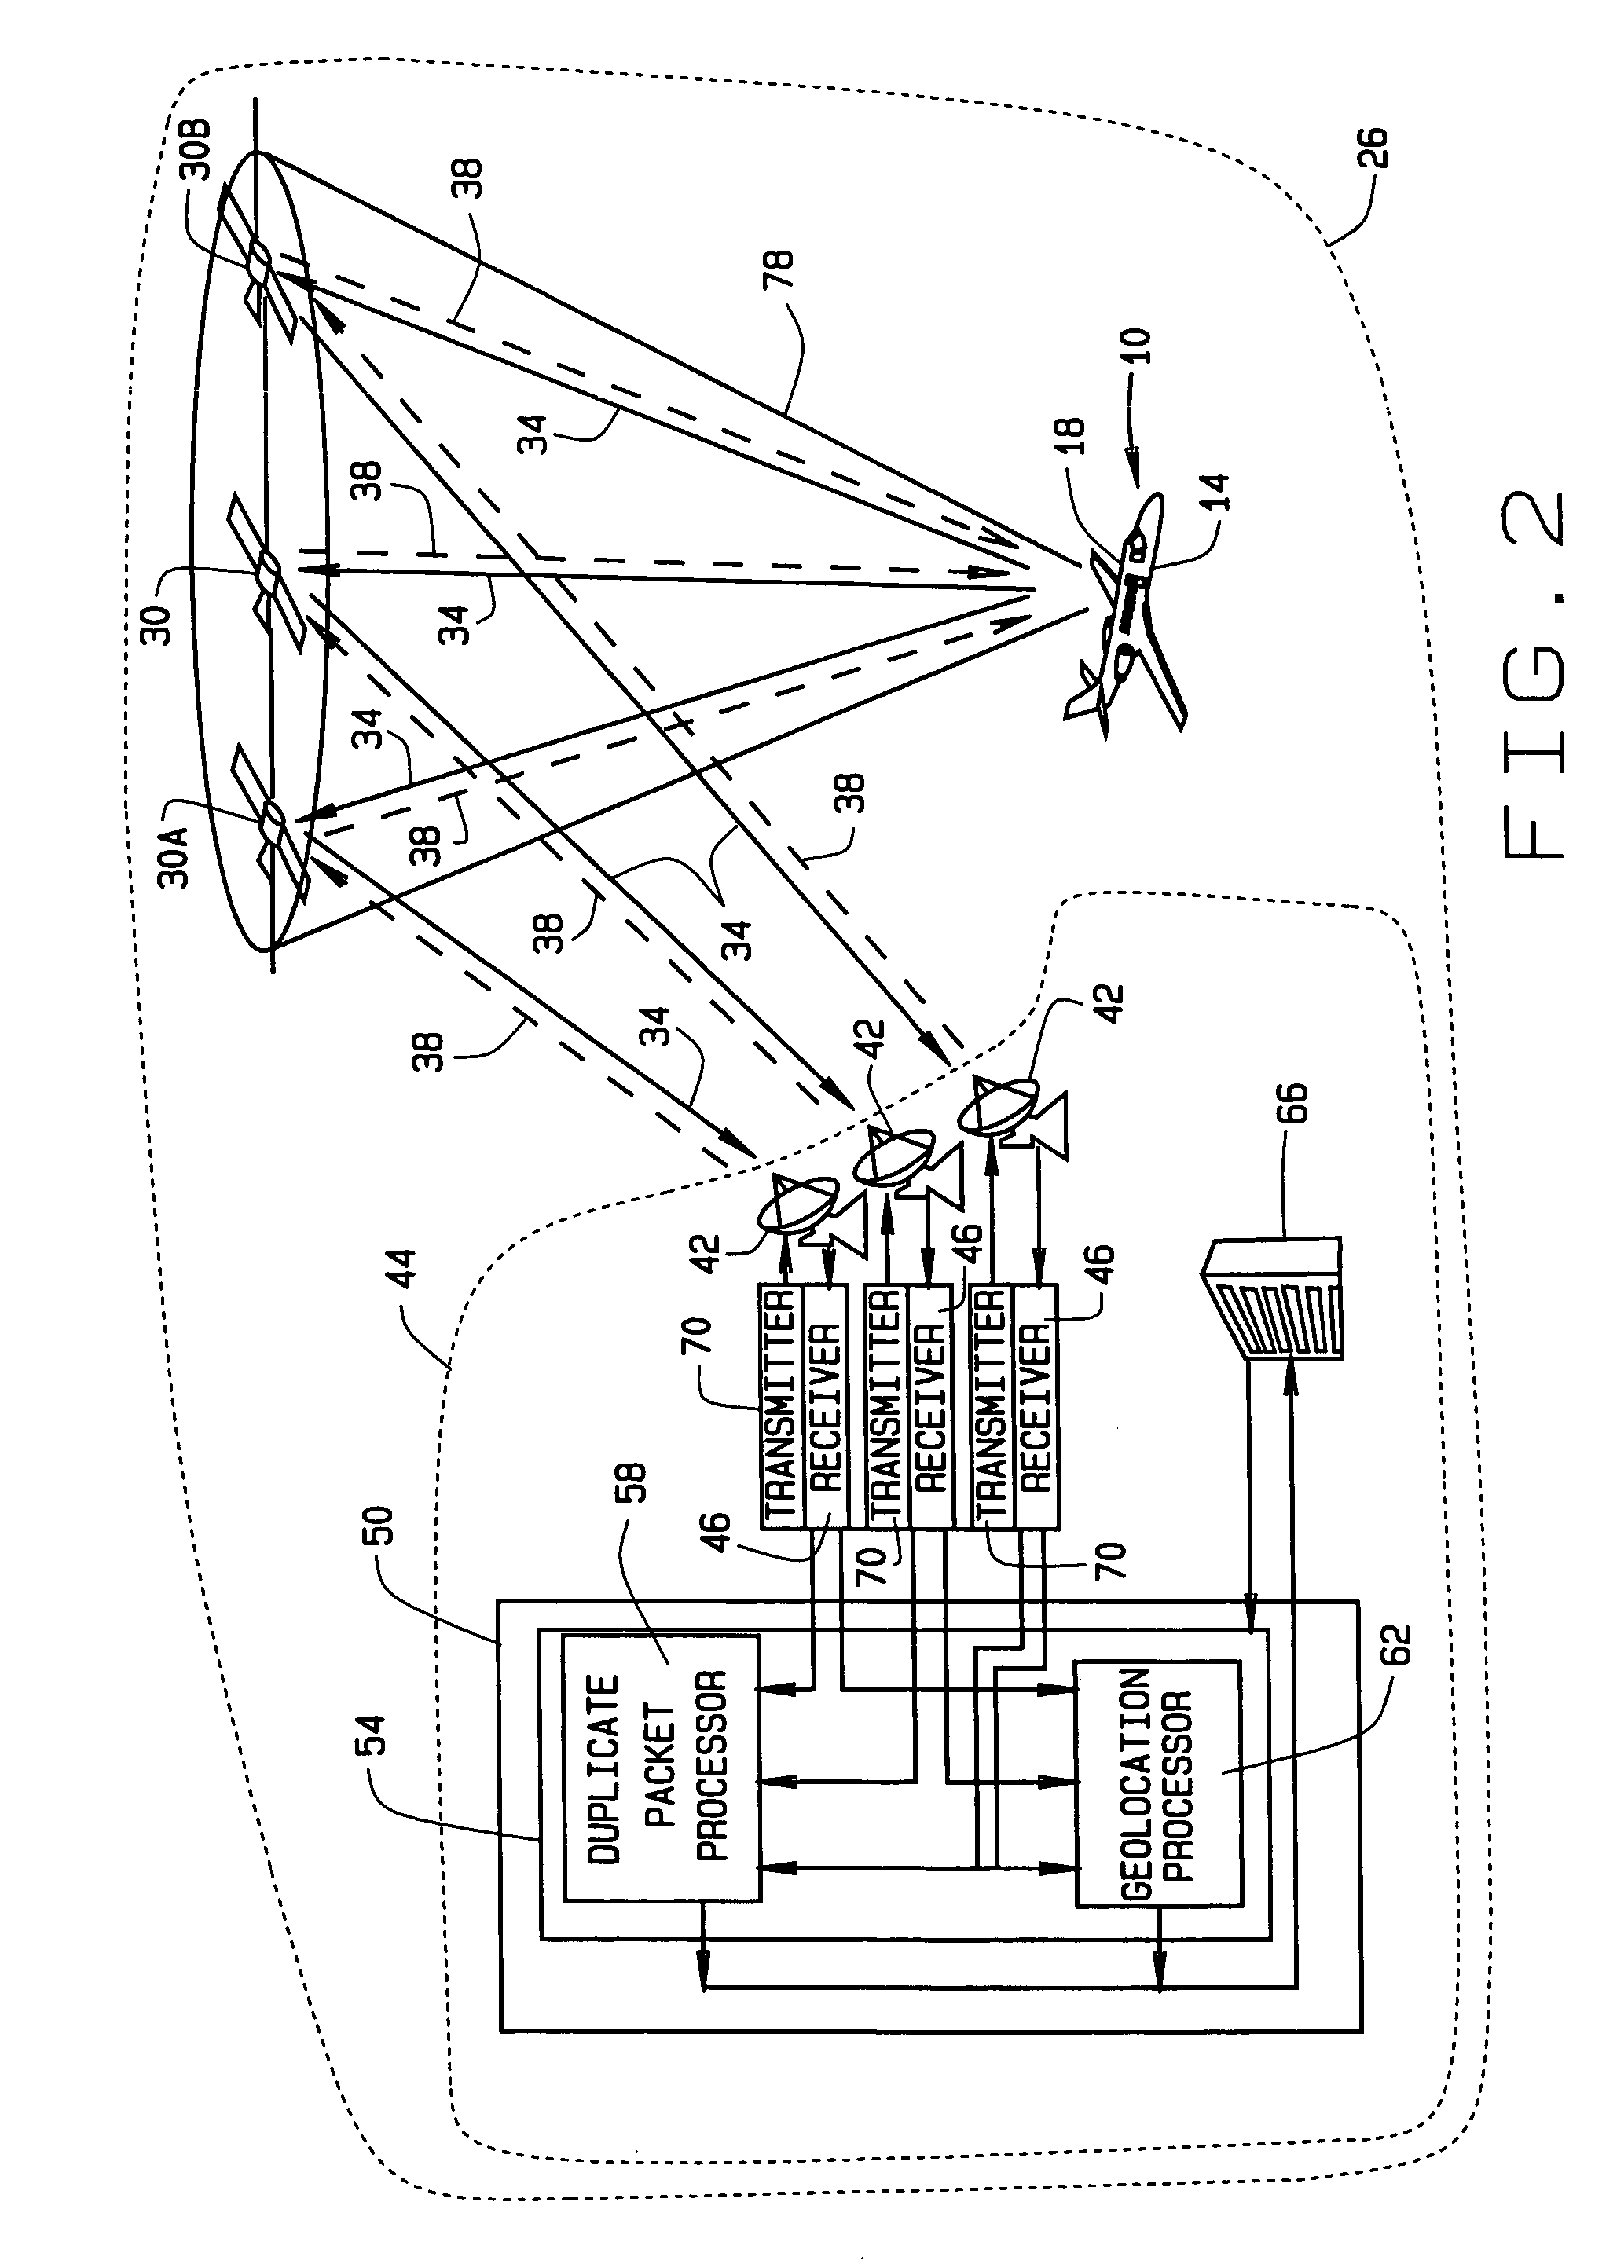 Low data rate mobile platform communication system and method